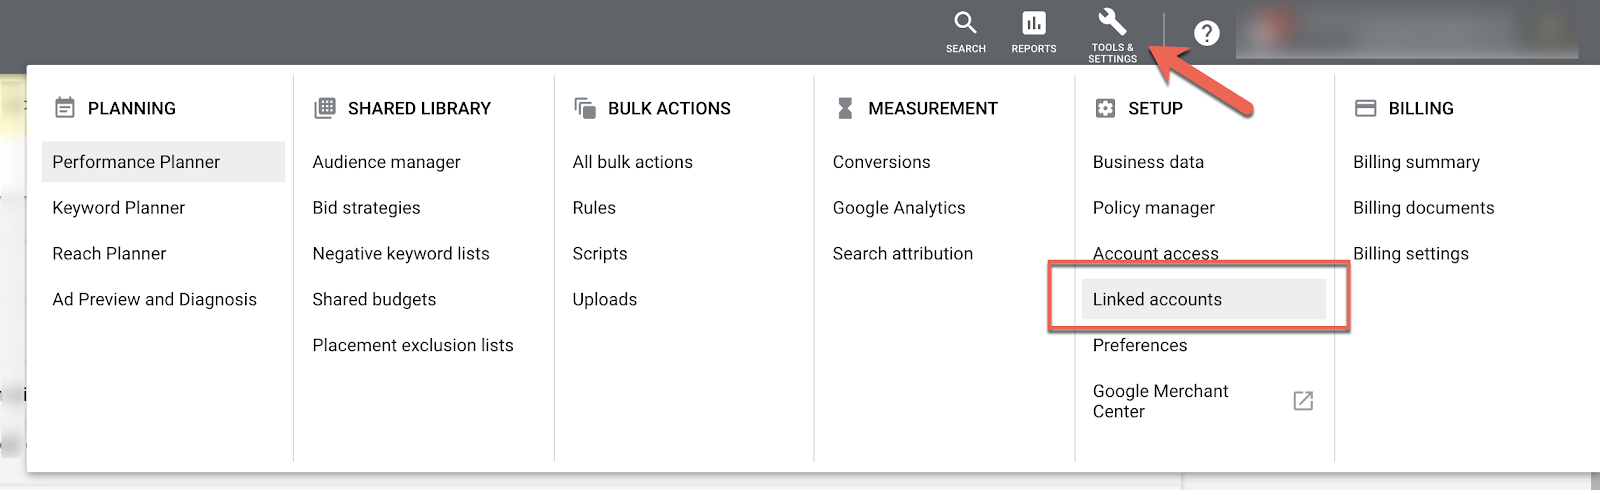 linking google analytics to google ads for auto tagging google ads